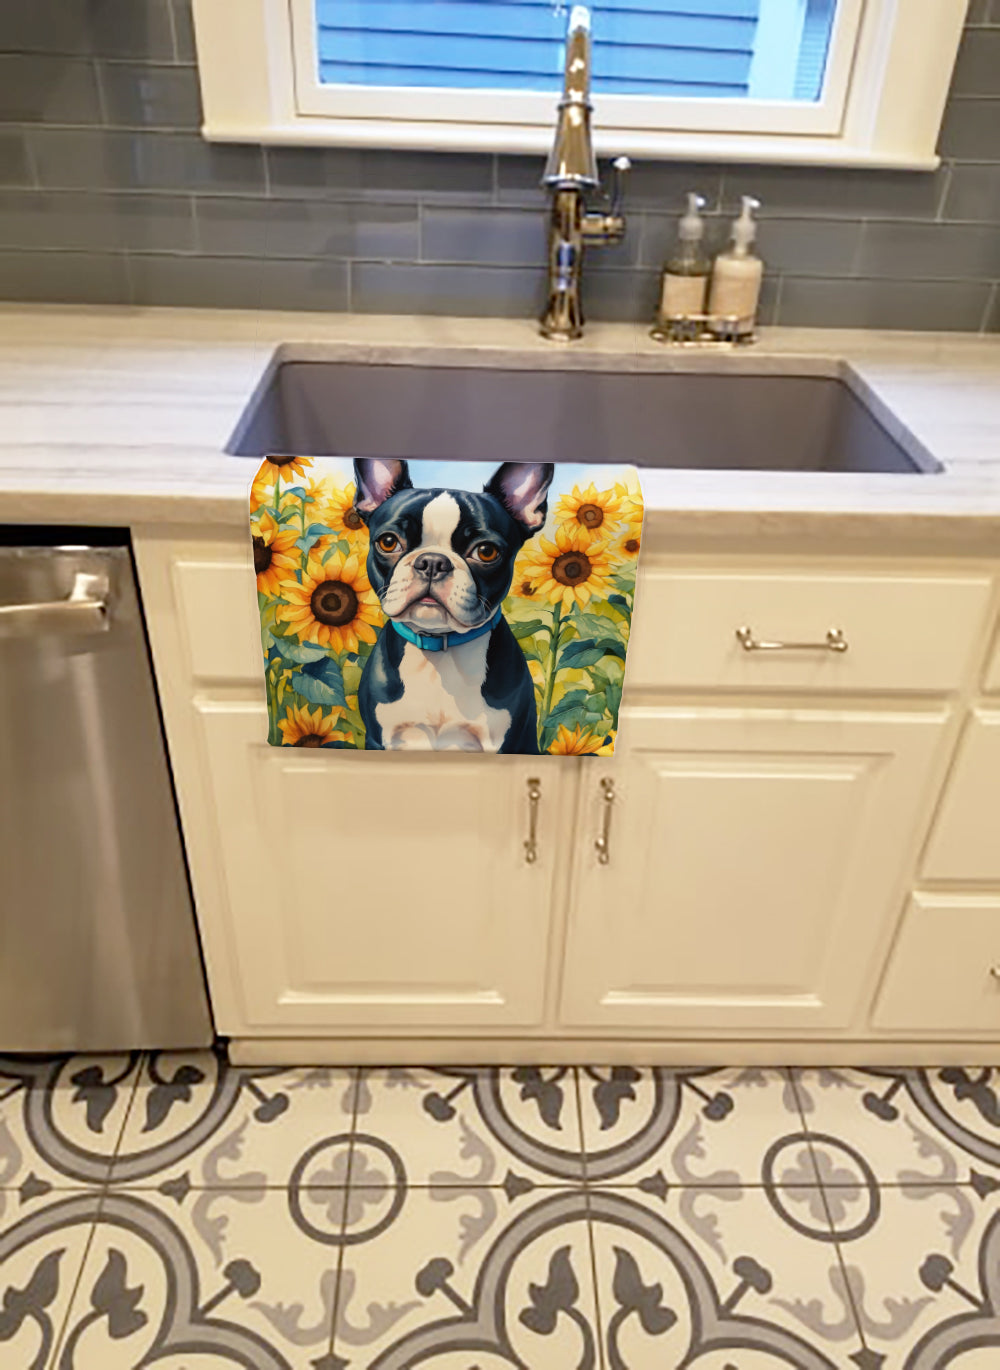 Buy this Boston Terrier in Sunflowers Kitchen Towel